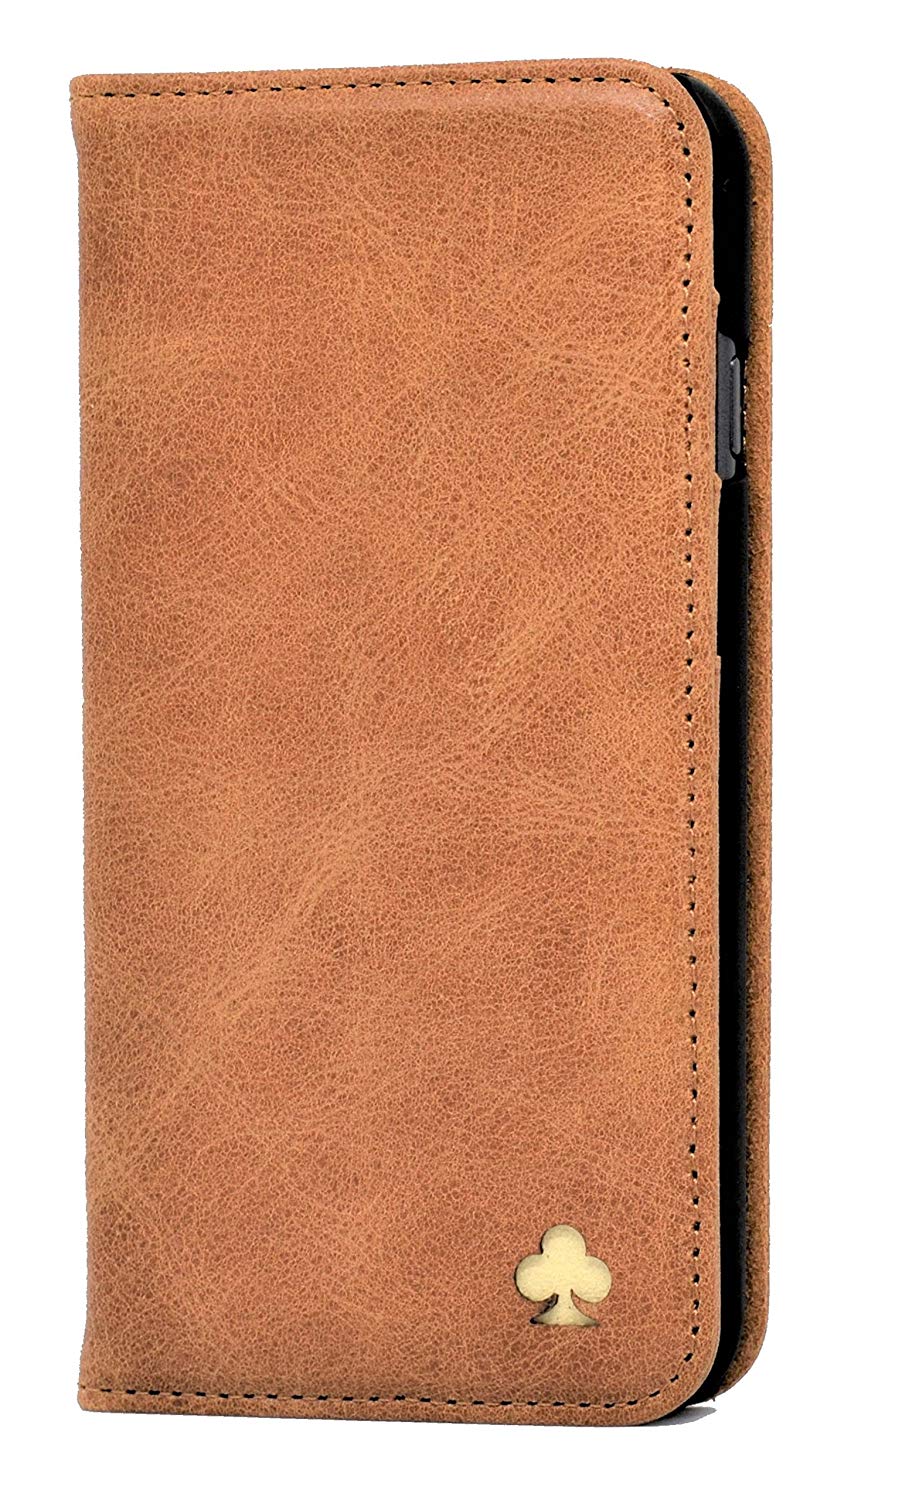 iPhone 11 Leather Case. Premium Slim Genuine Leather Stand Case/Cover/Wallet (Tan)